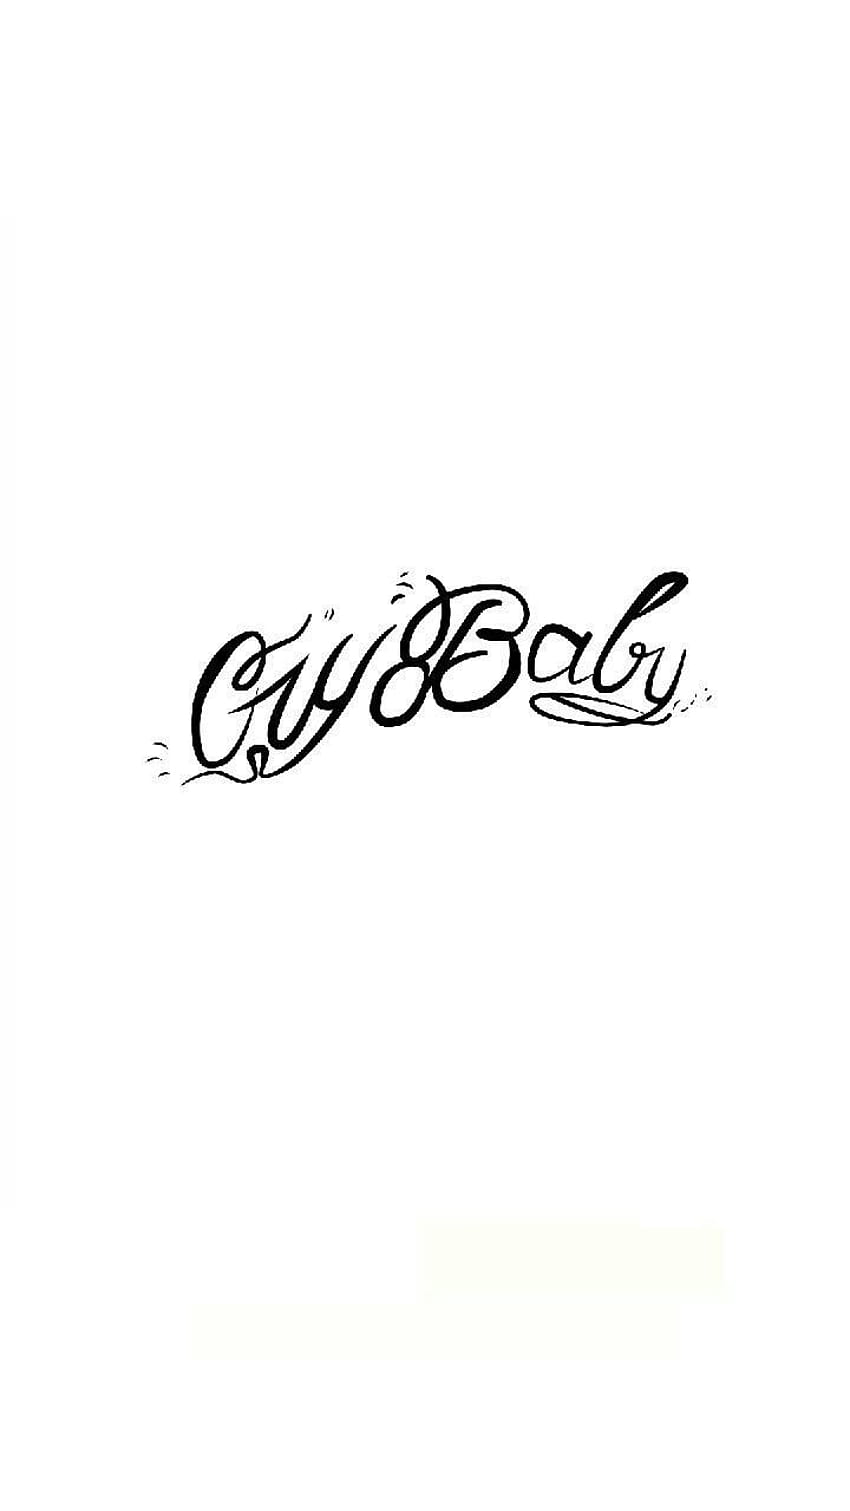 Discover more than 77 lil peep crybaby tattoo best  thtantai2